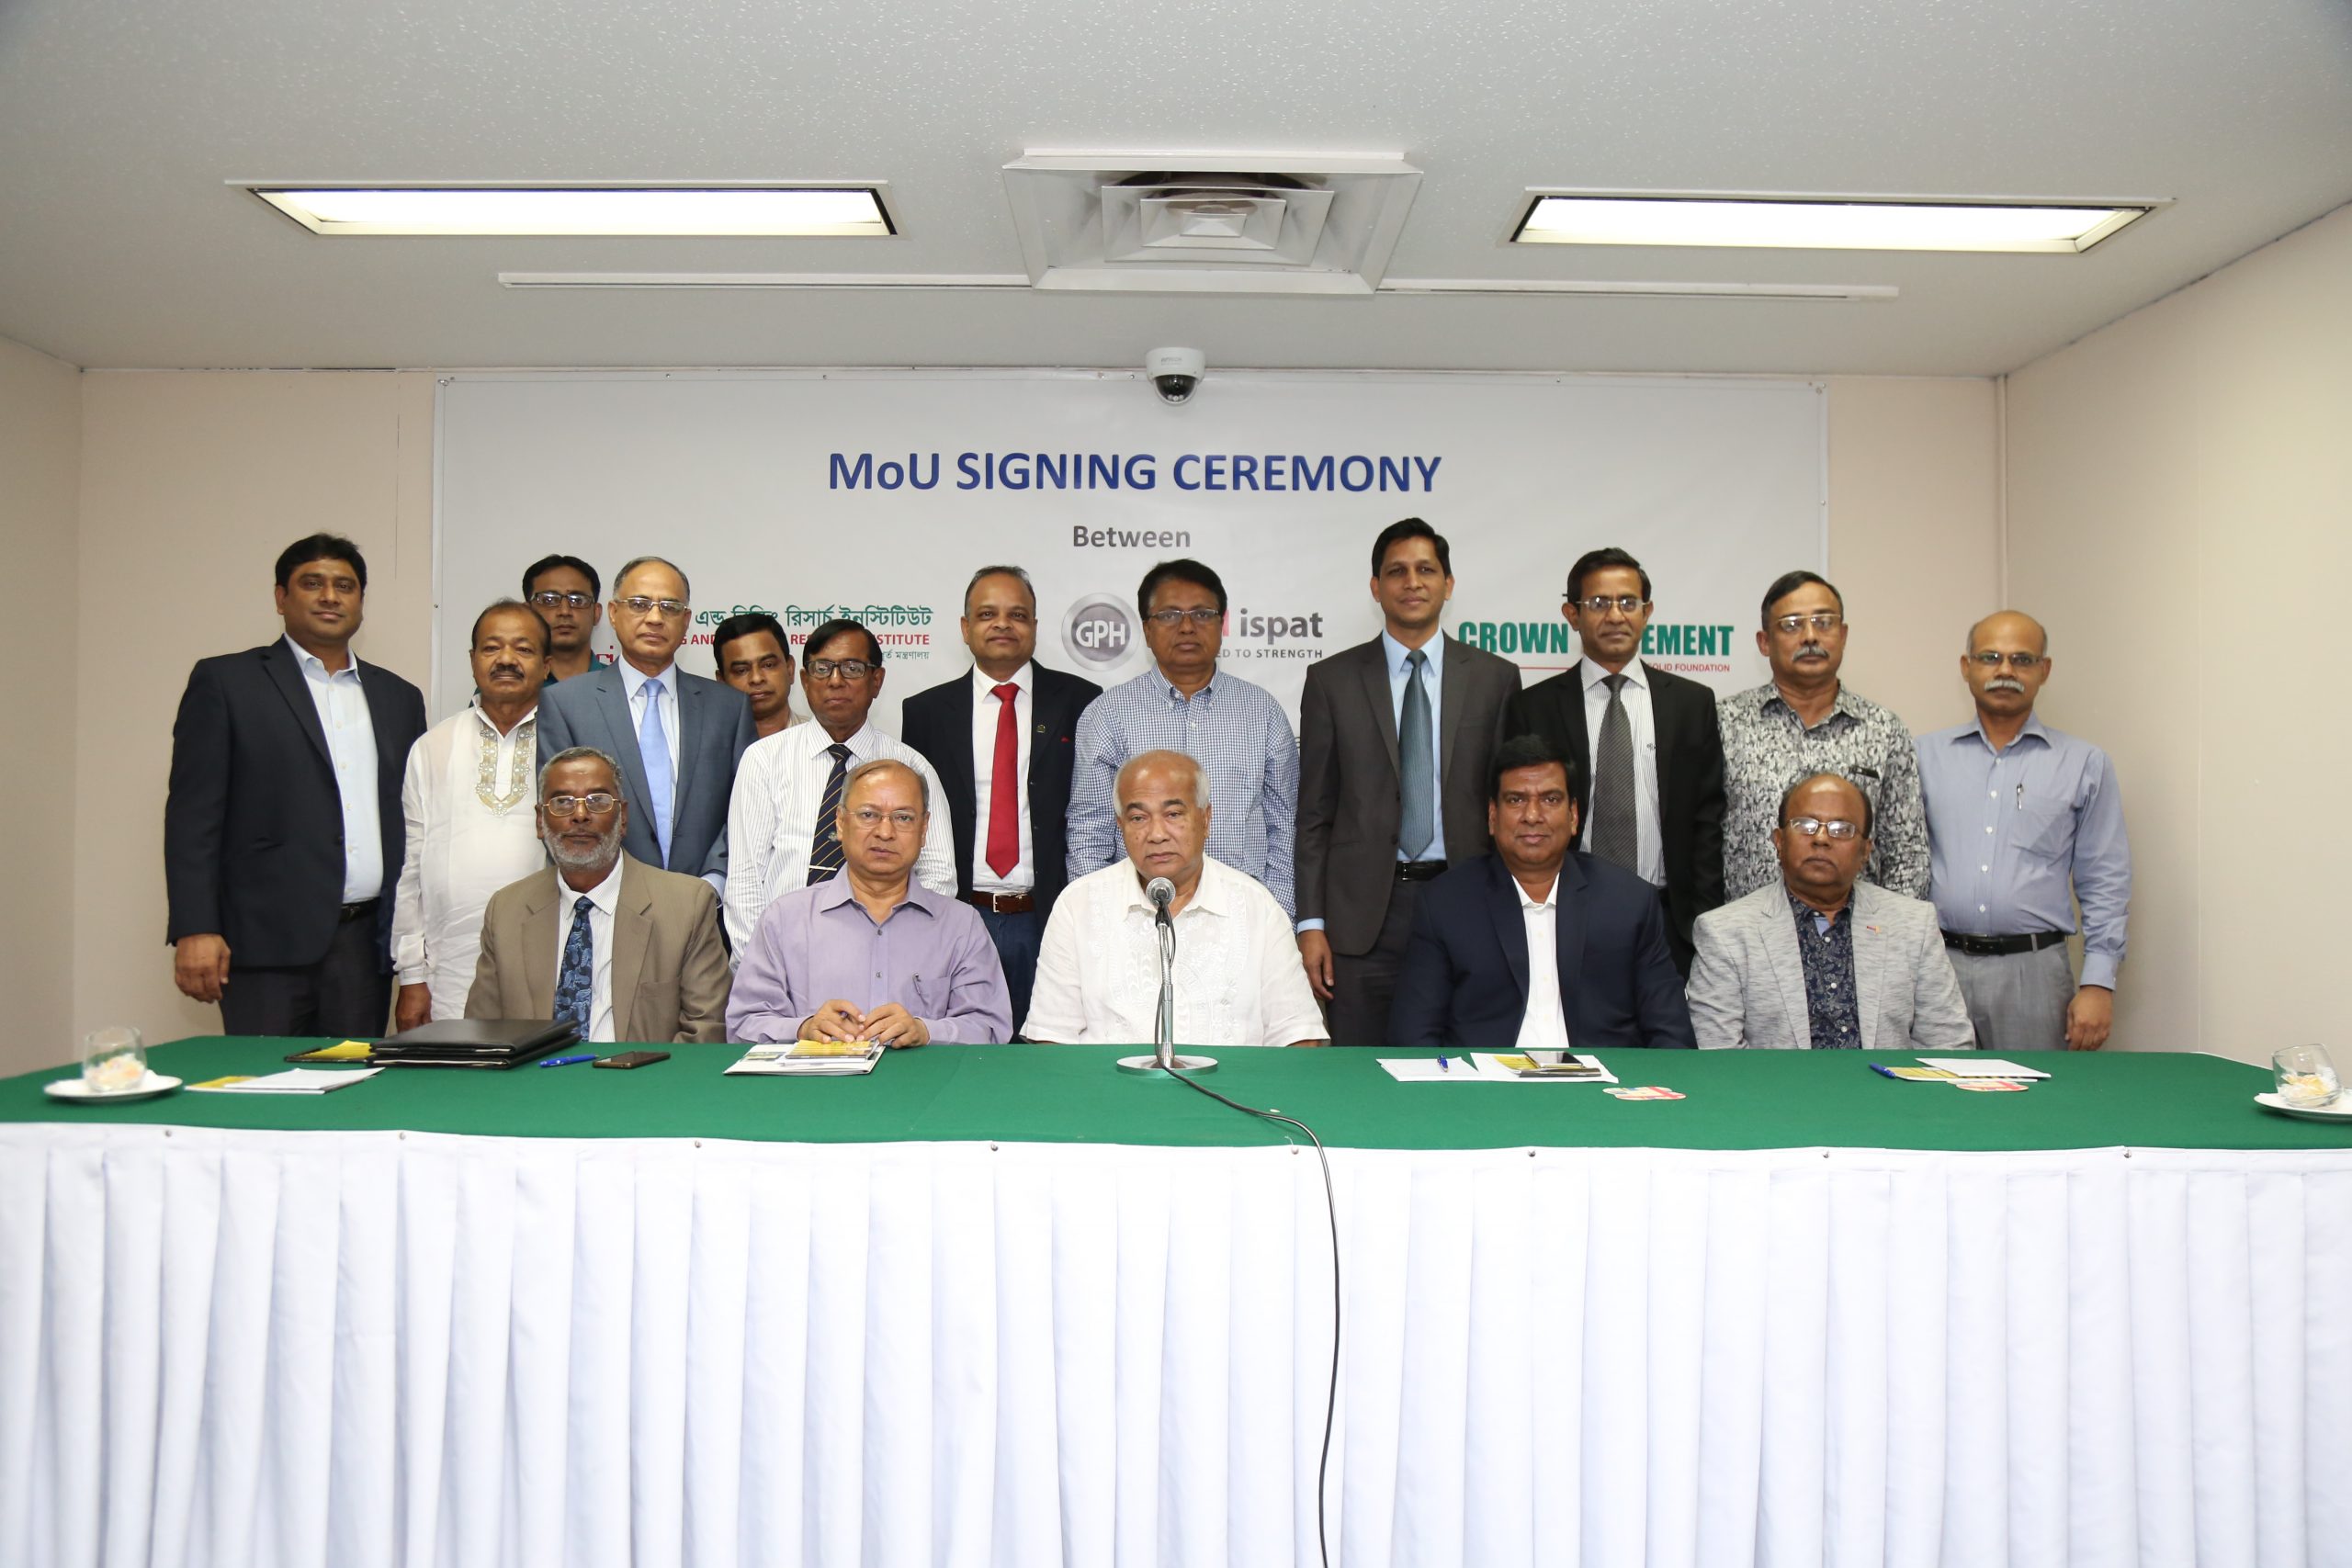 Crown Cement, GPH Ispat sign MoUs with